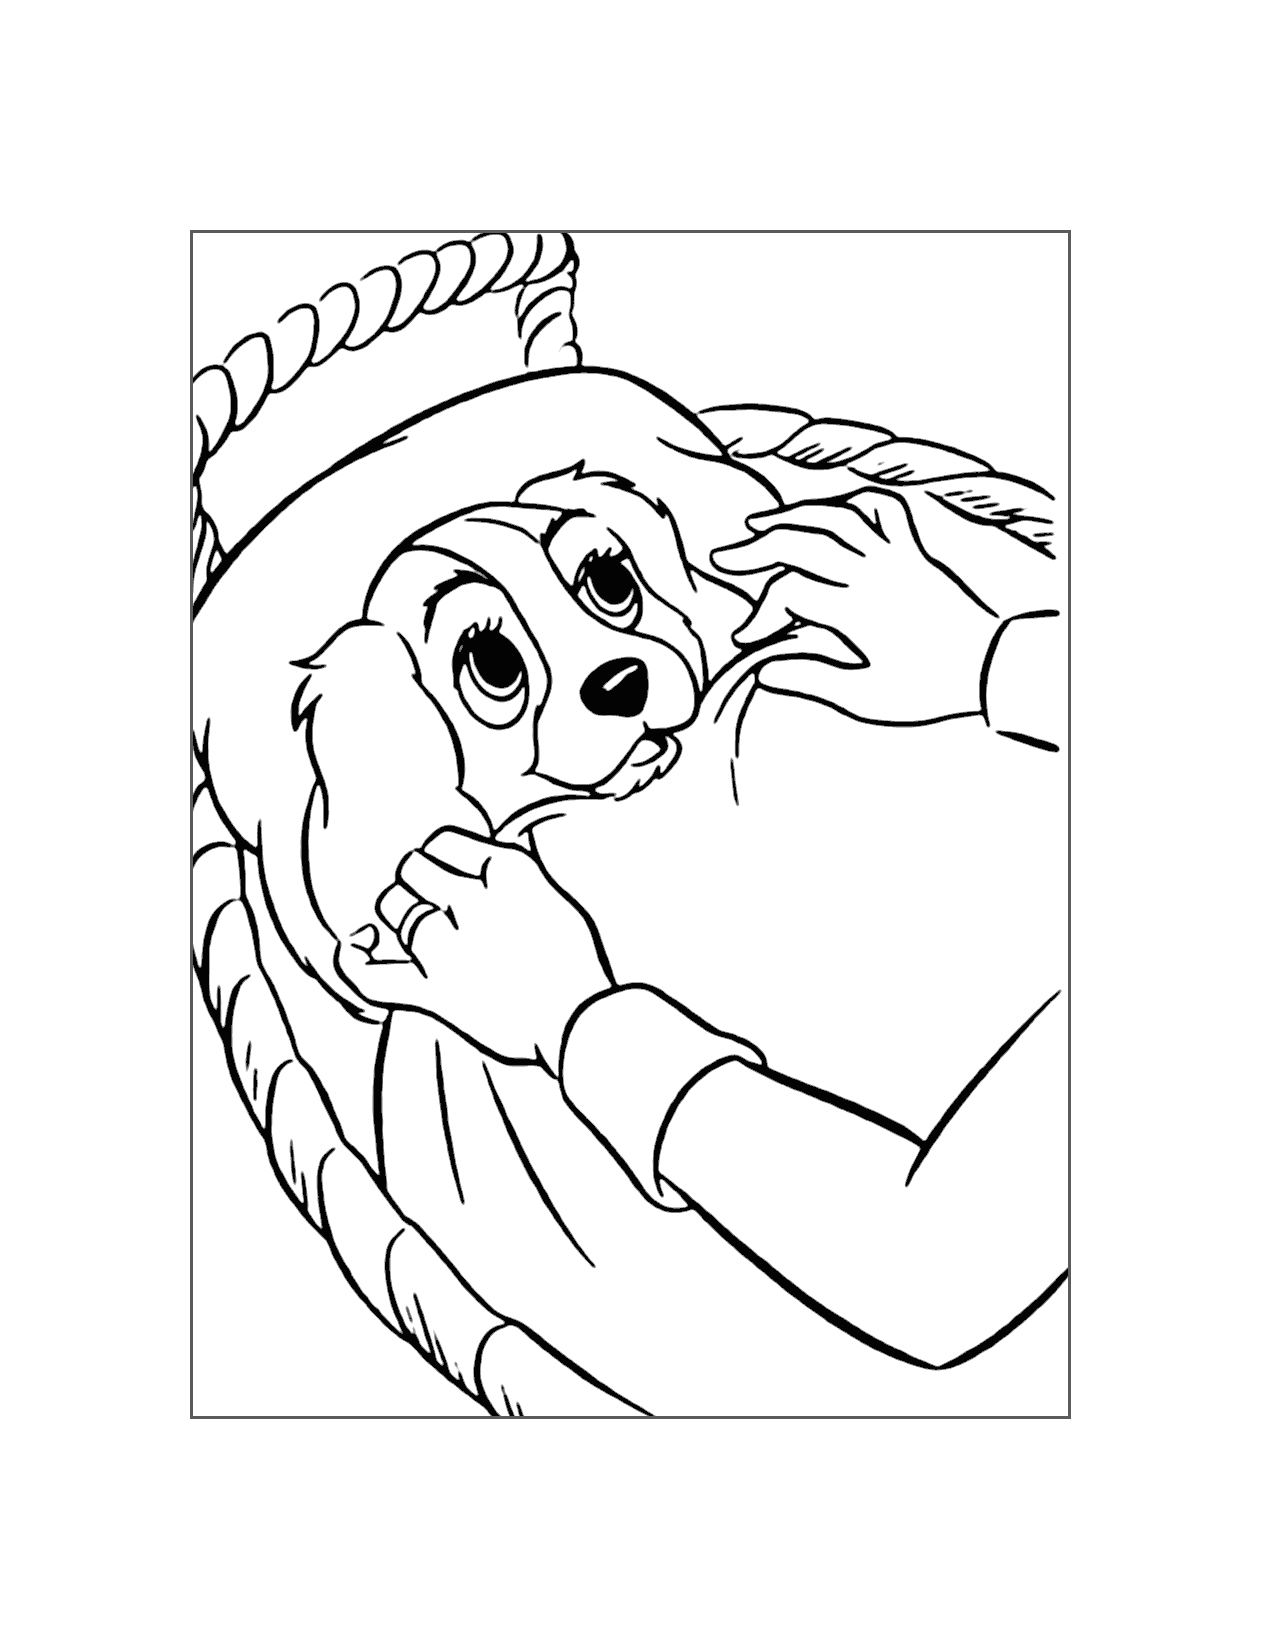 Tucking In Lady Coloring Page